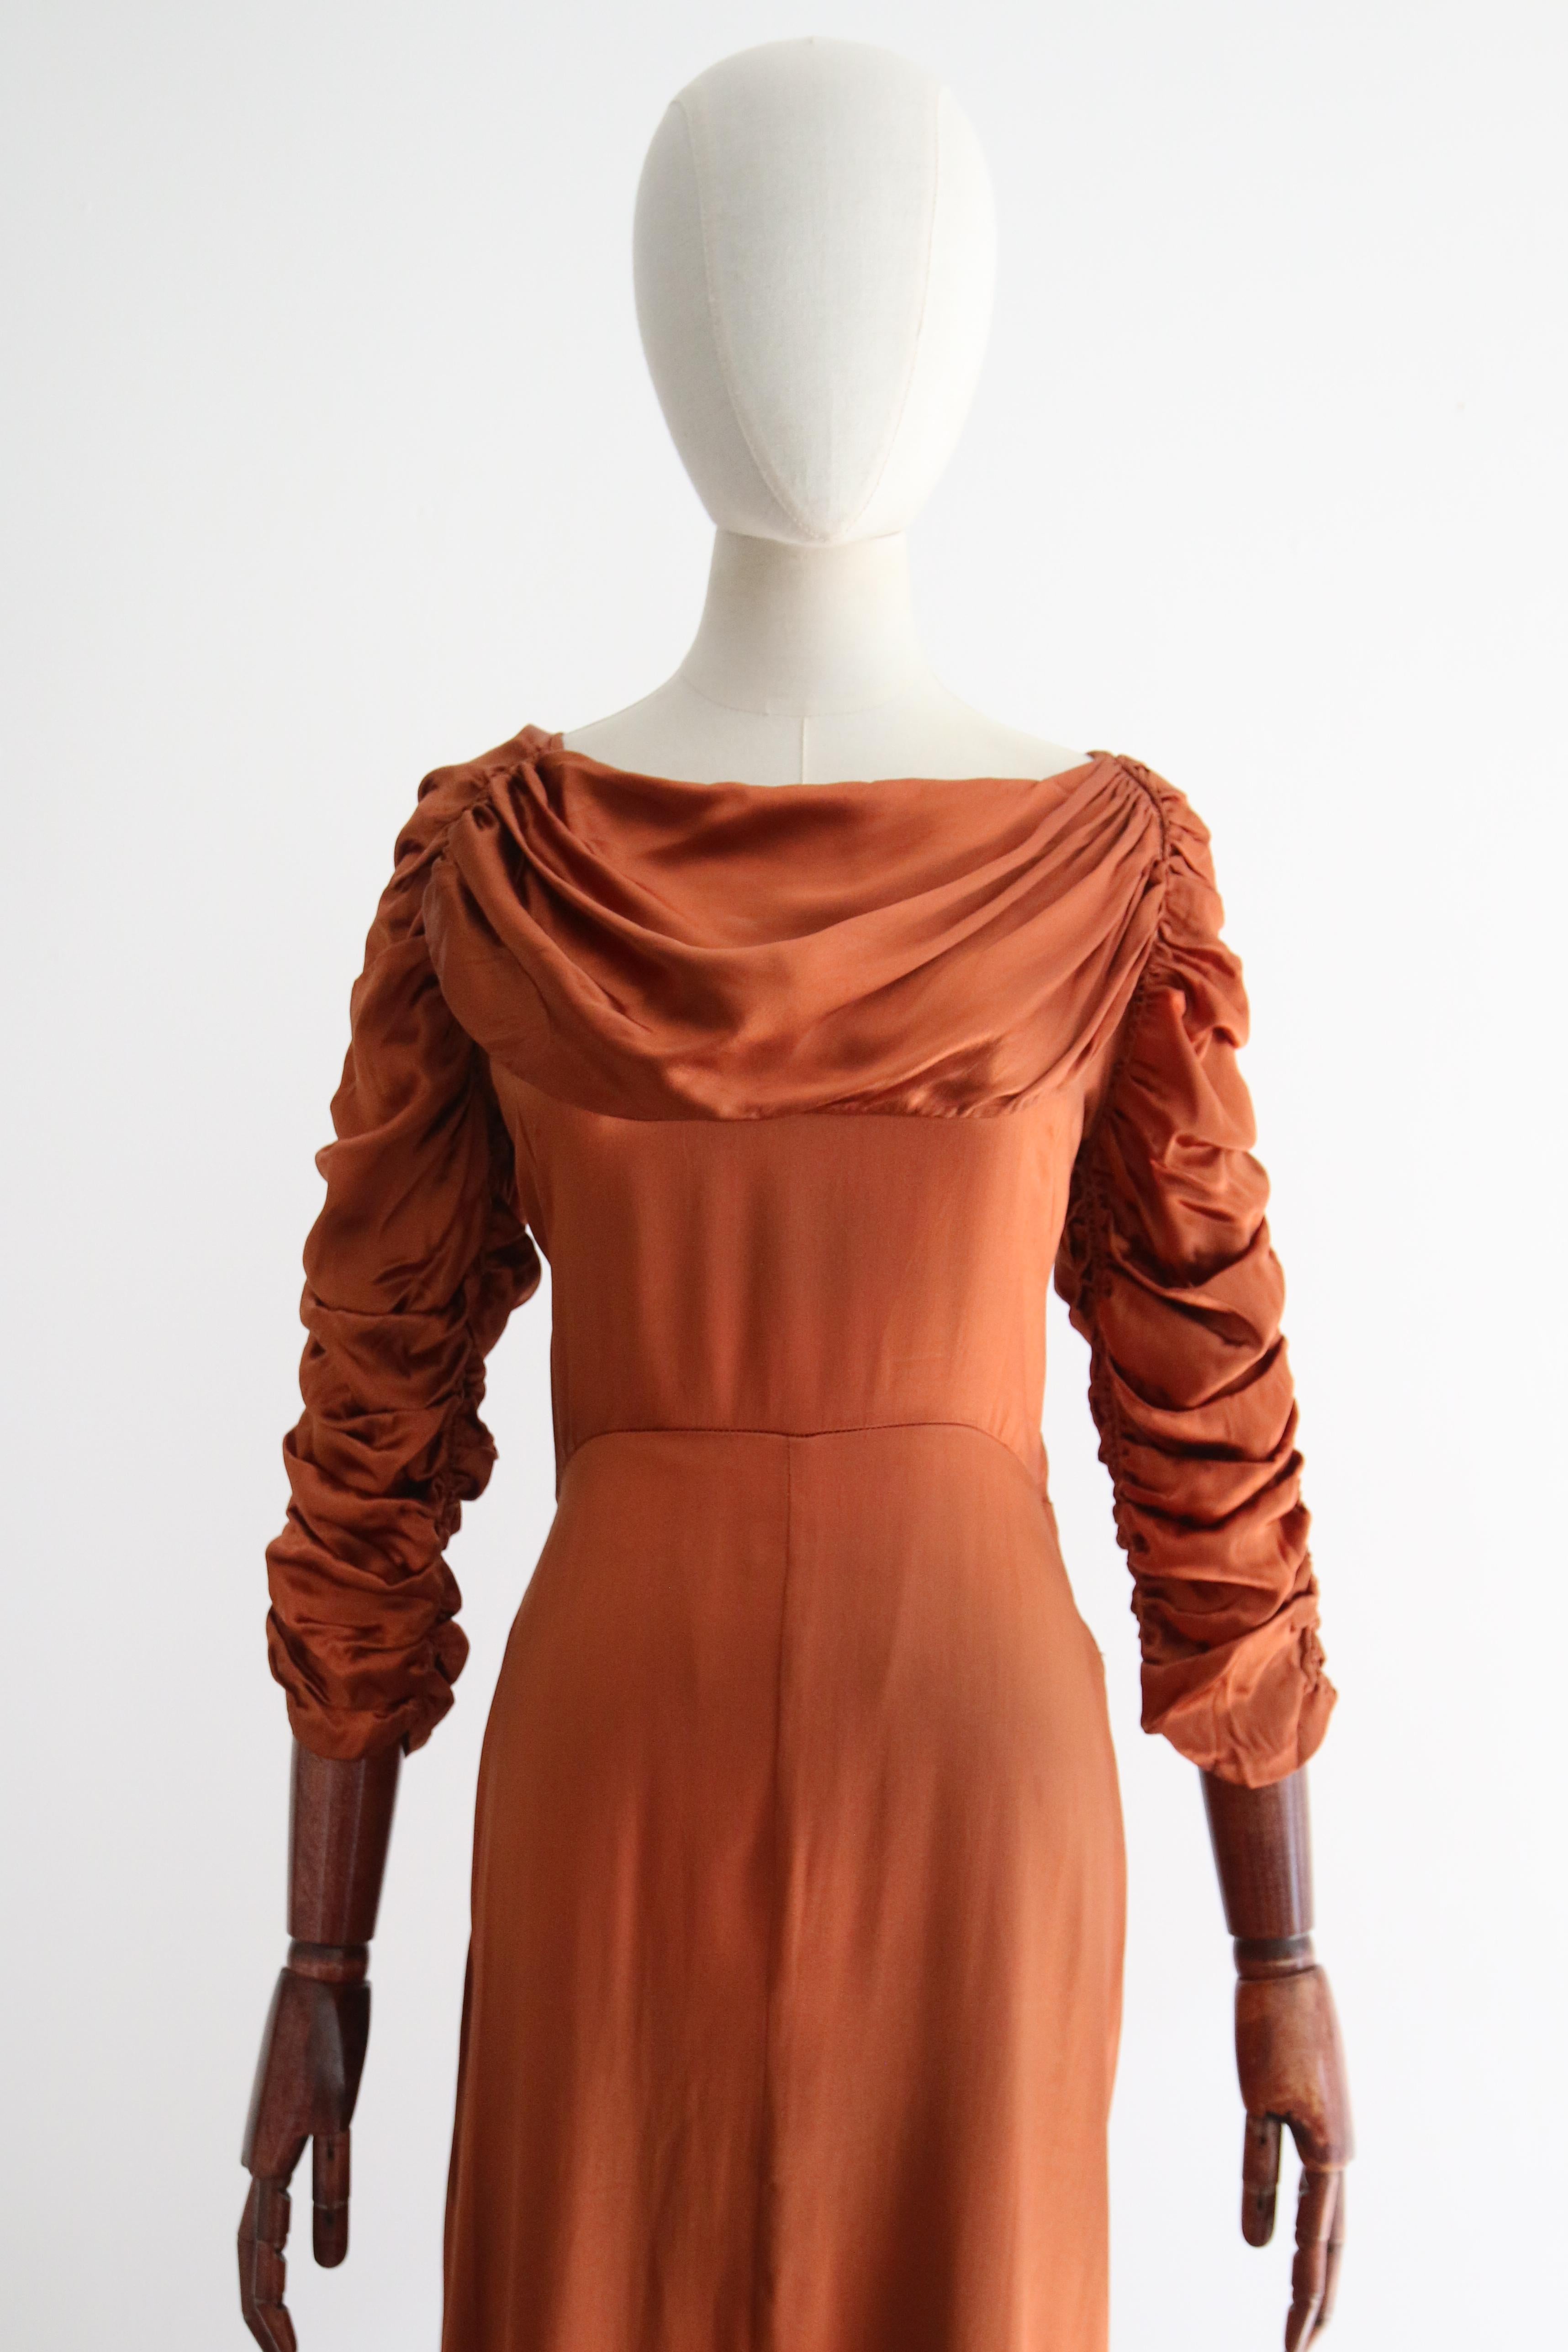 A beauty to behold, this original 1930's satin dress rendered in the most sumptuous shade of amber satin, is the perfect statement piece for your special occasion wardrobe. 

The rounded neckline is framed by a feature cowled panel, which drapes and